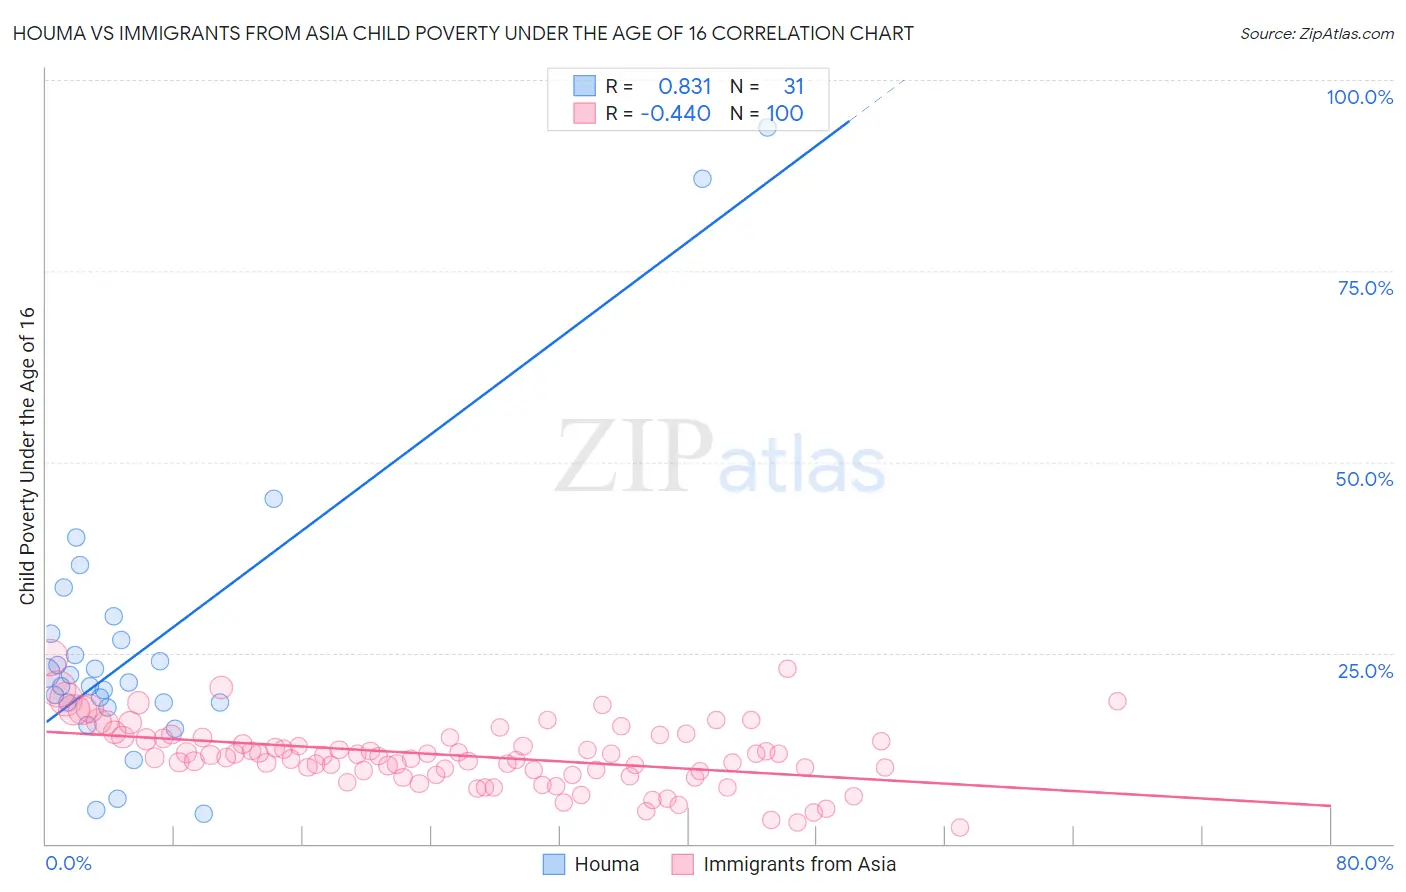 Houma vs Immigrants from Asia Child Poverty Under the Age of 16